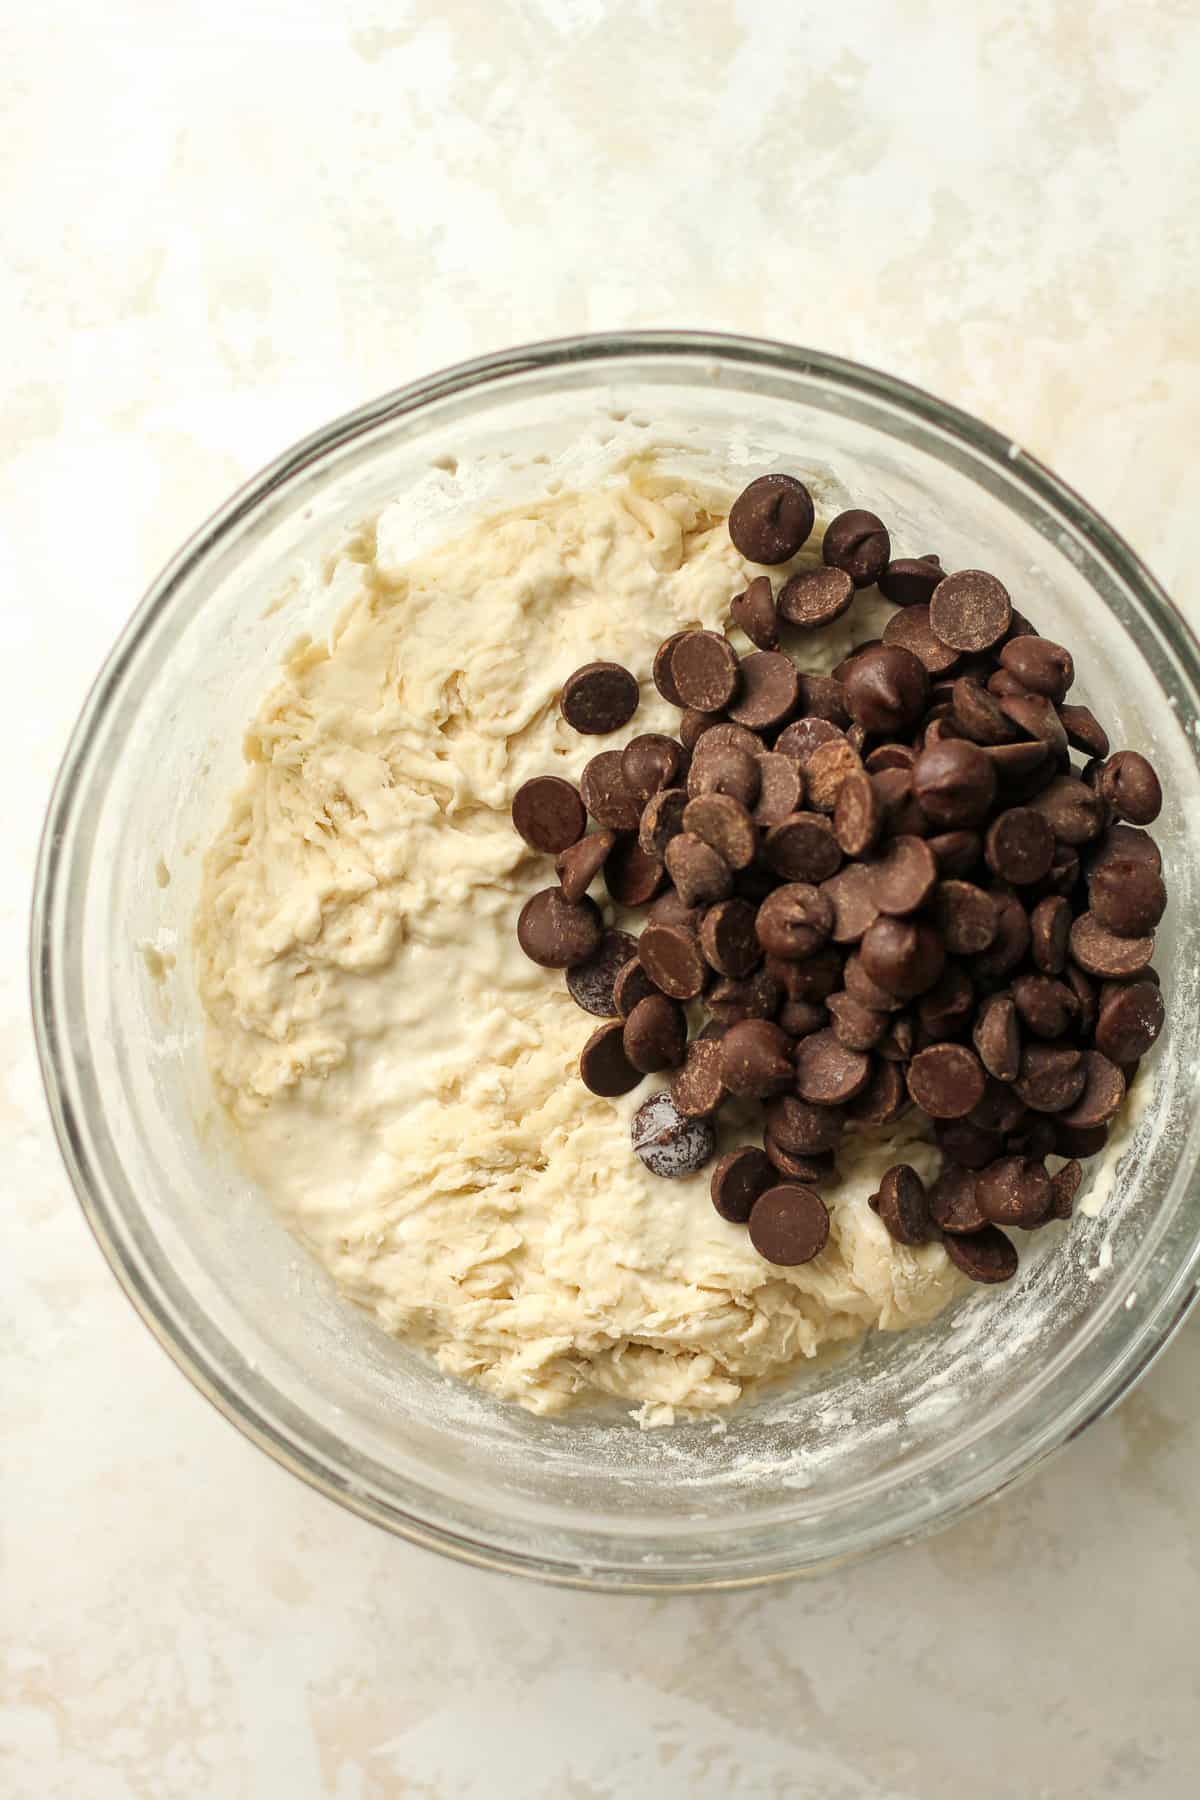 A bowl of the shaggy dough with dark chocolate chips on top.